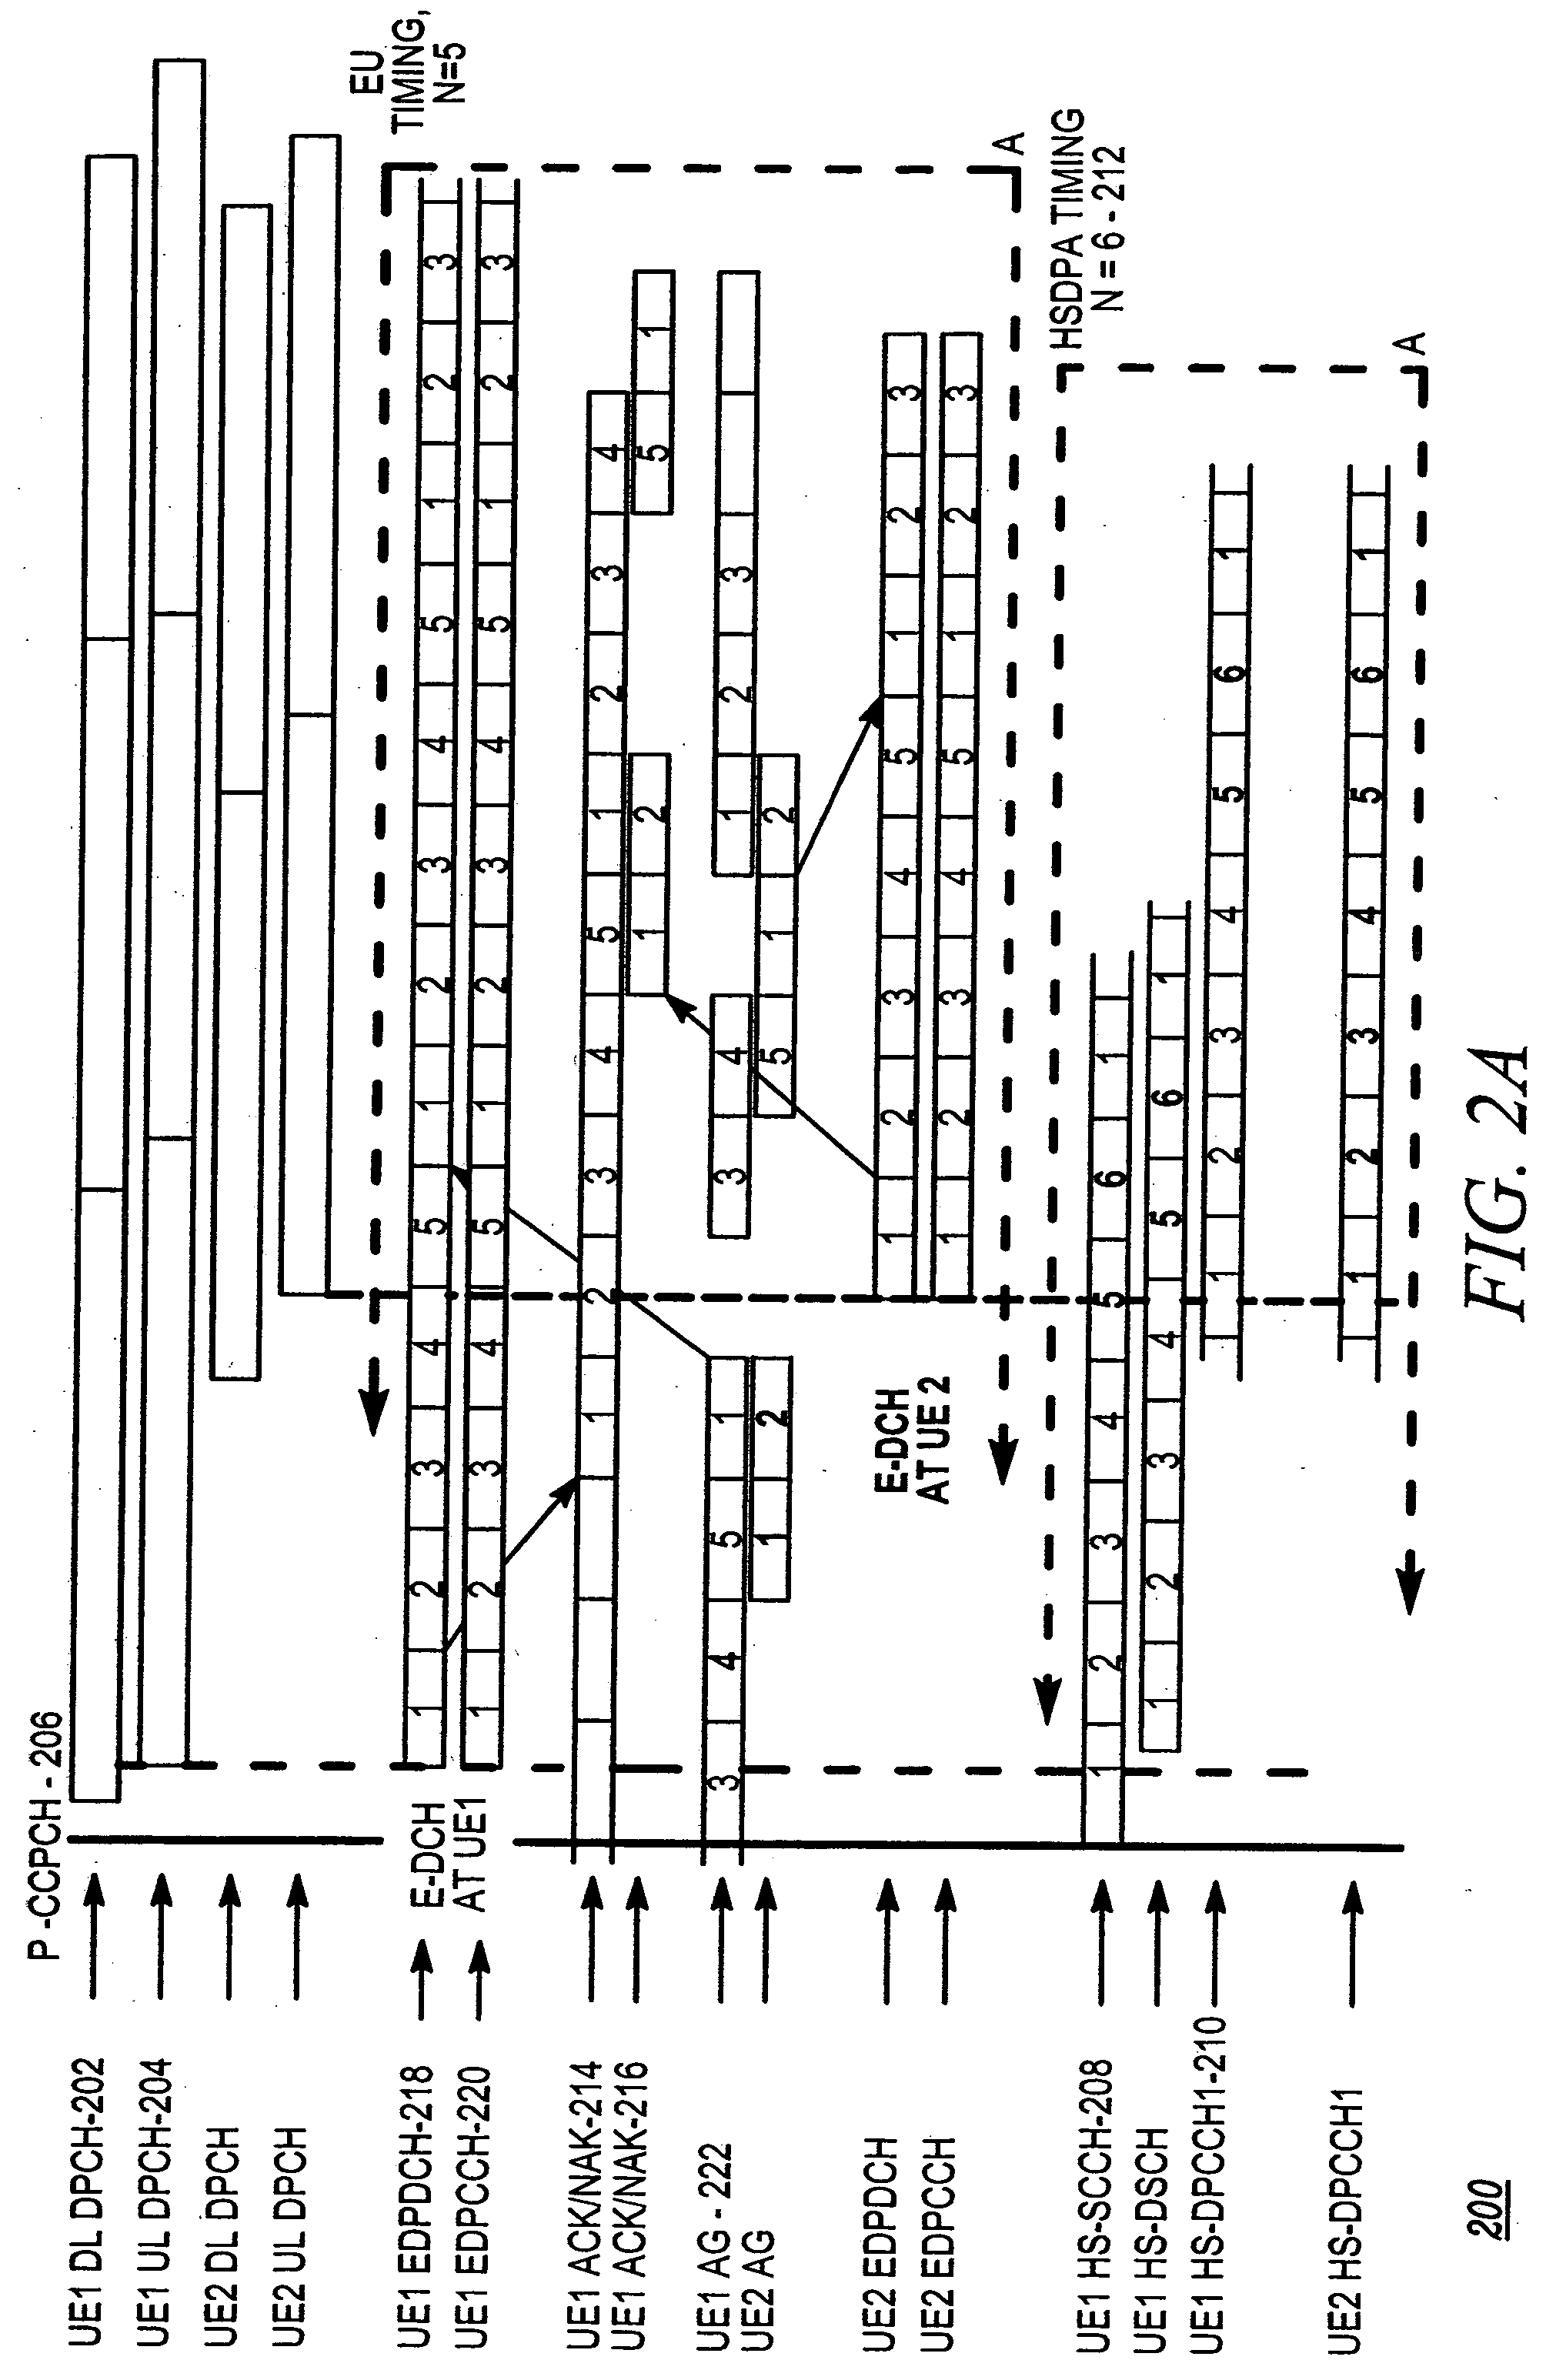 System and method for downlink signaling for high speed uplink packet access